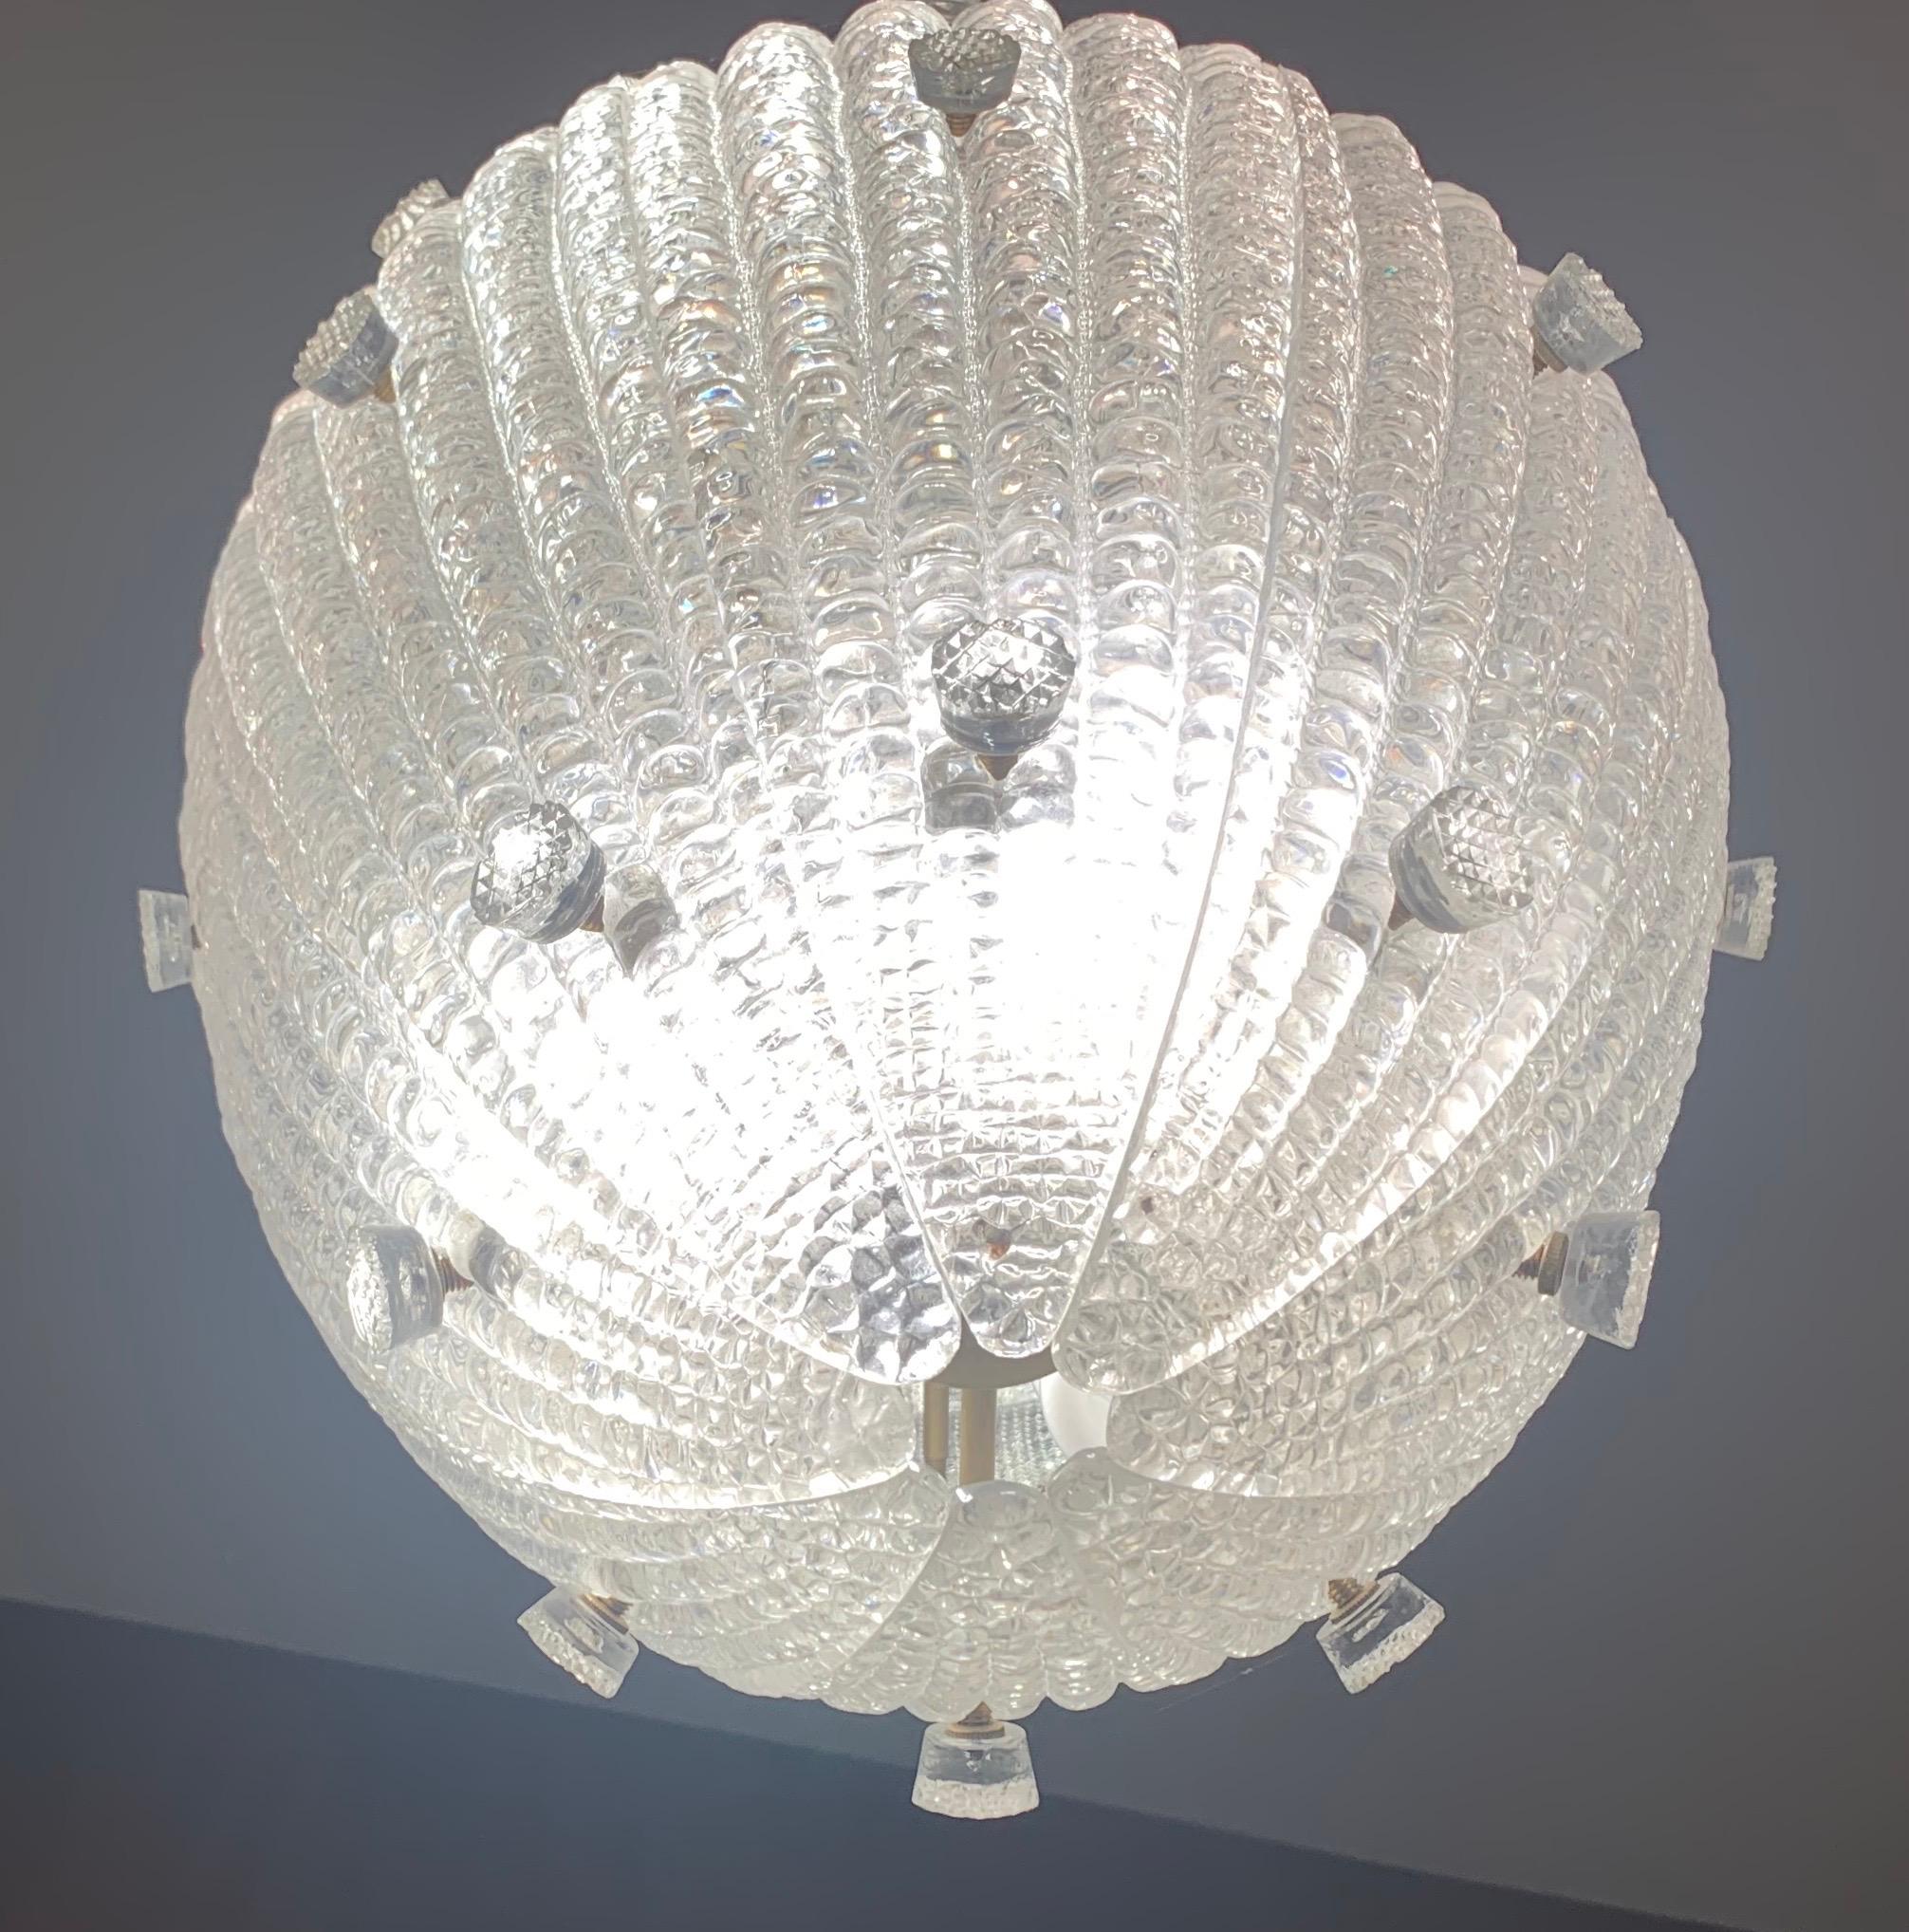 A rare Mid-Century Modern Massive Orrefors Carl Fagerlund pendant panel lantern light fixture
The current height is 55